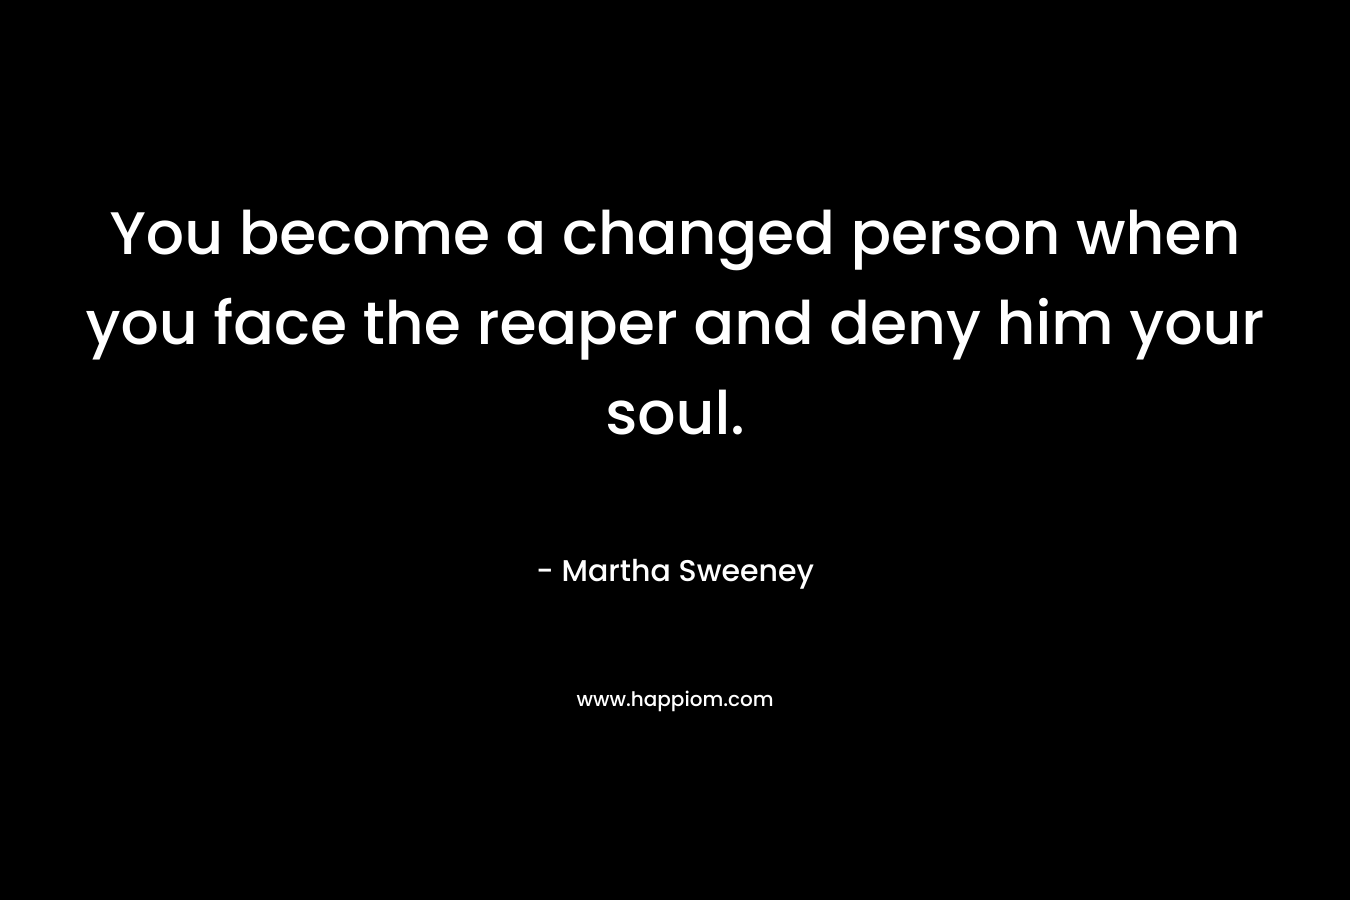 You become a changed person when you face the reaper and deny him your soul.